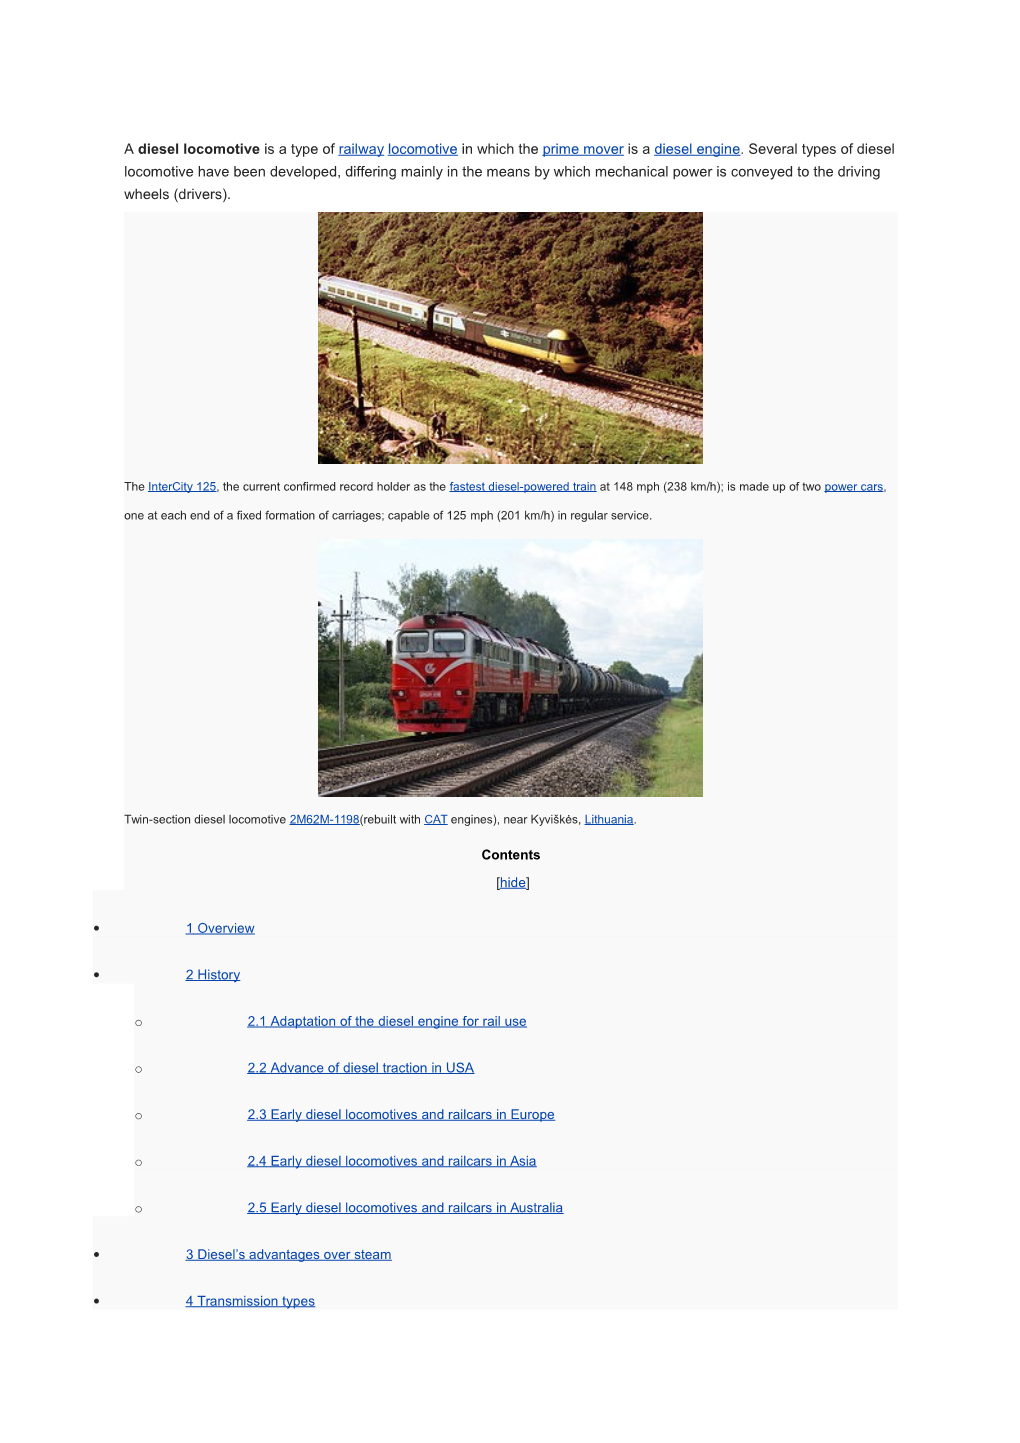 A Diesel Locomotive Is a Type of Railway Locomotive in Which the Prime Mover Is a Diesel Engine